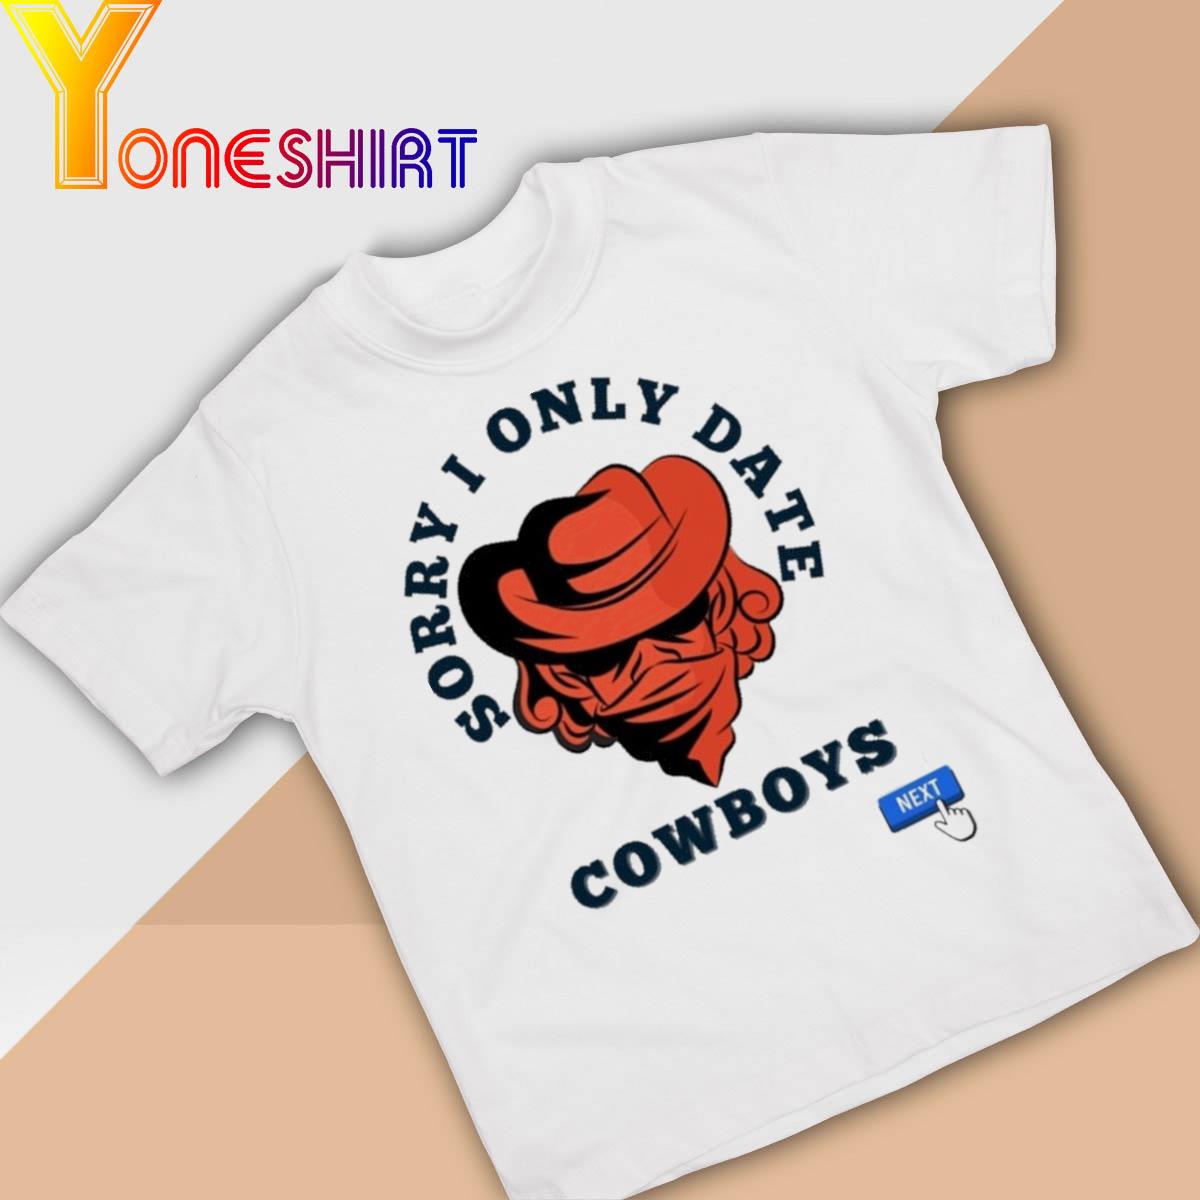 Sorry I Only Date Cowboys Next shirt